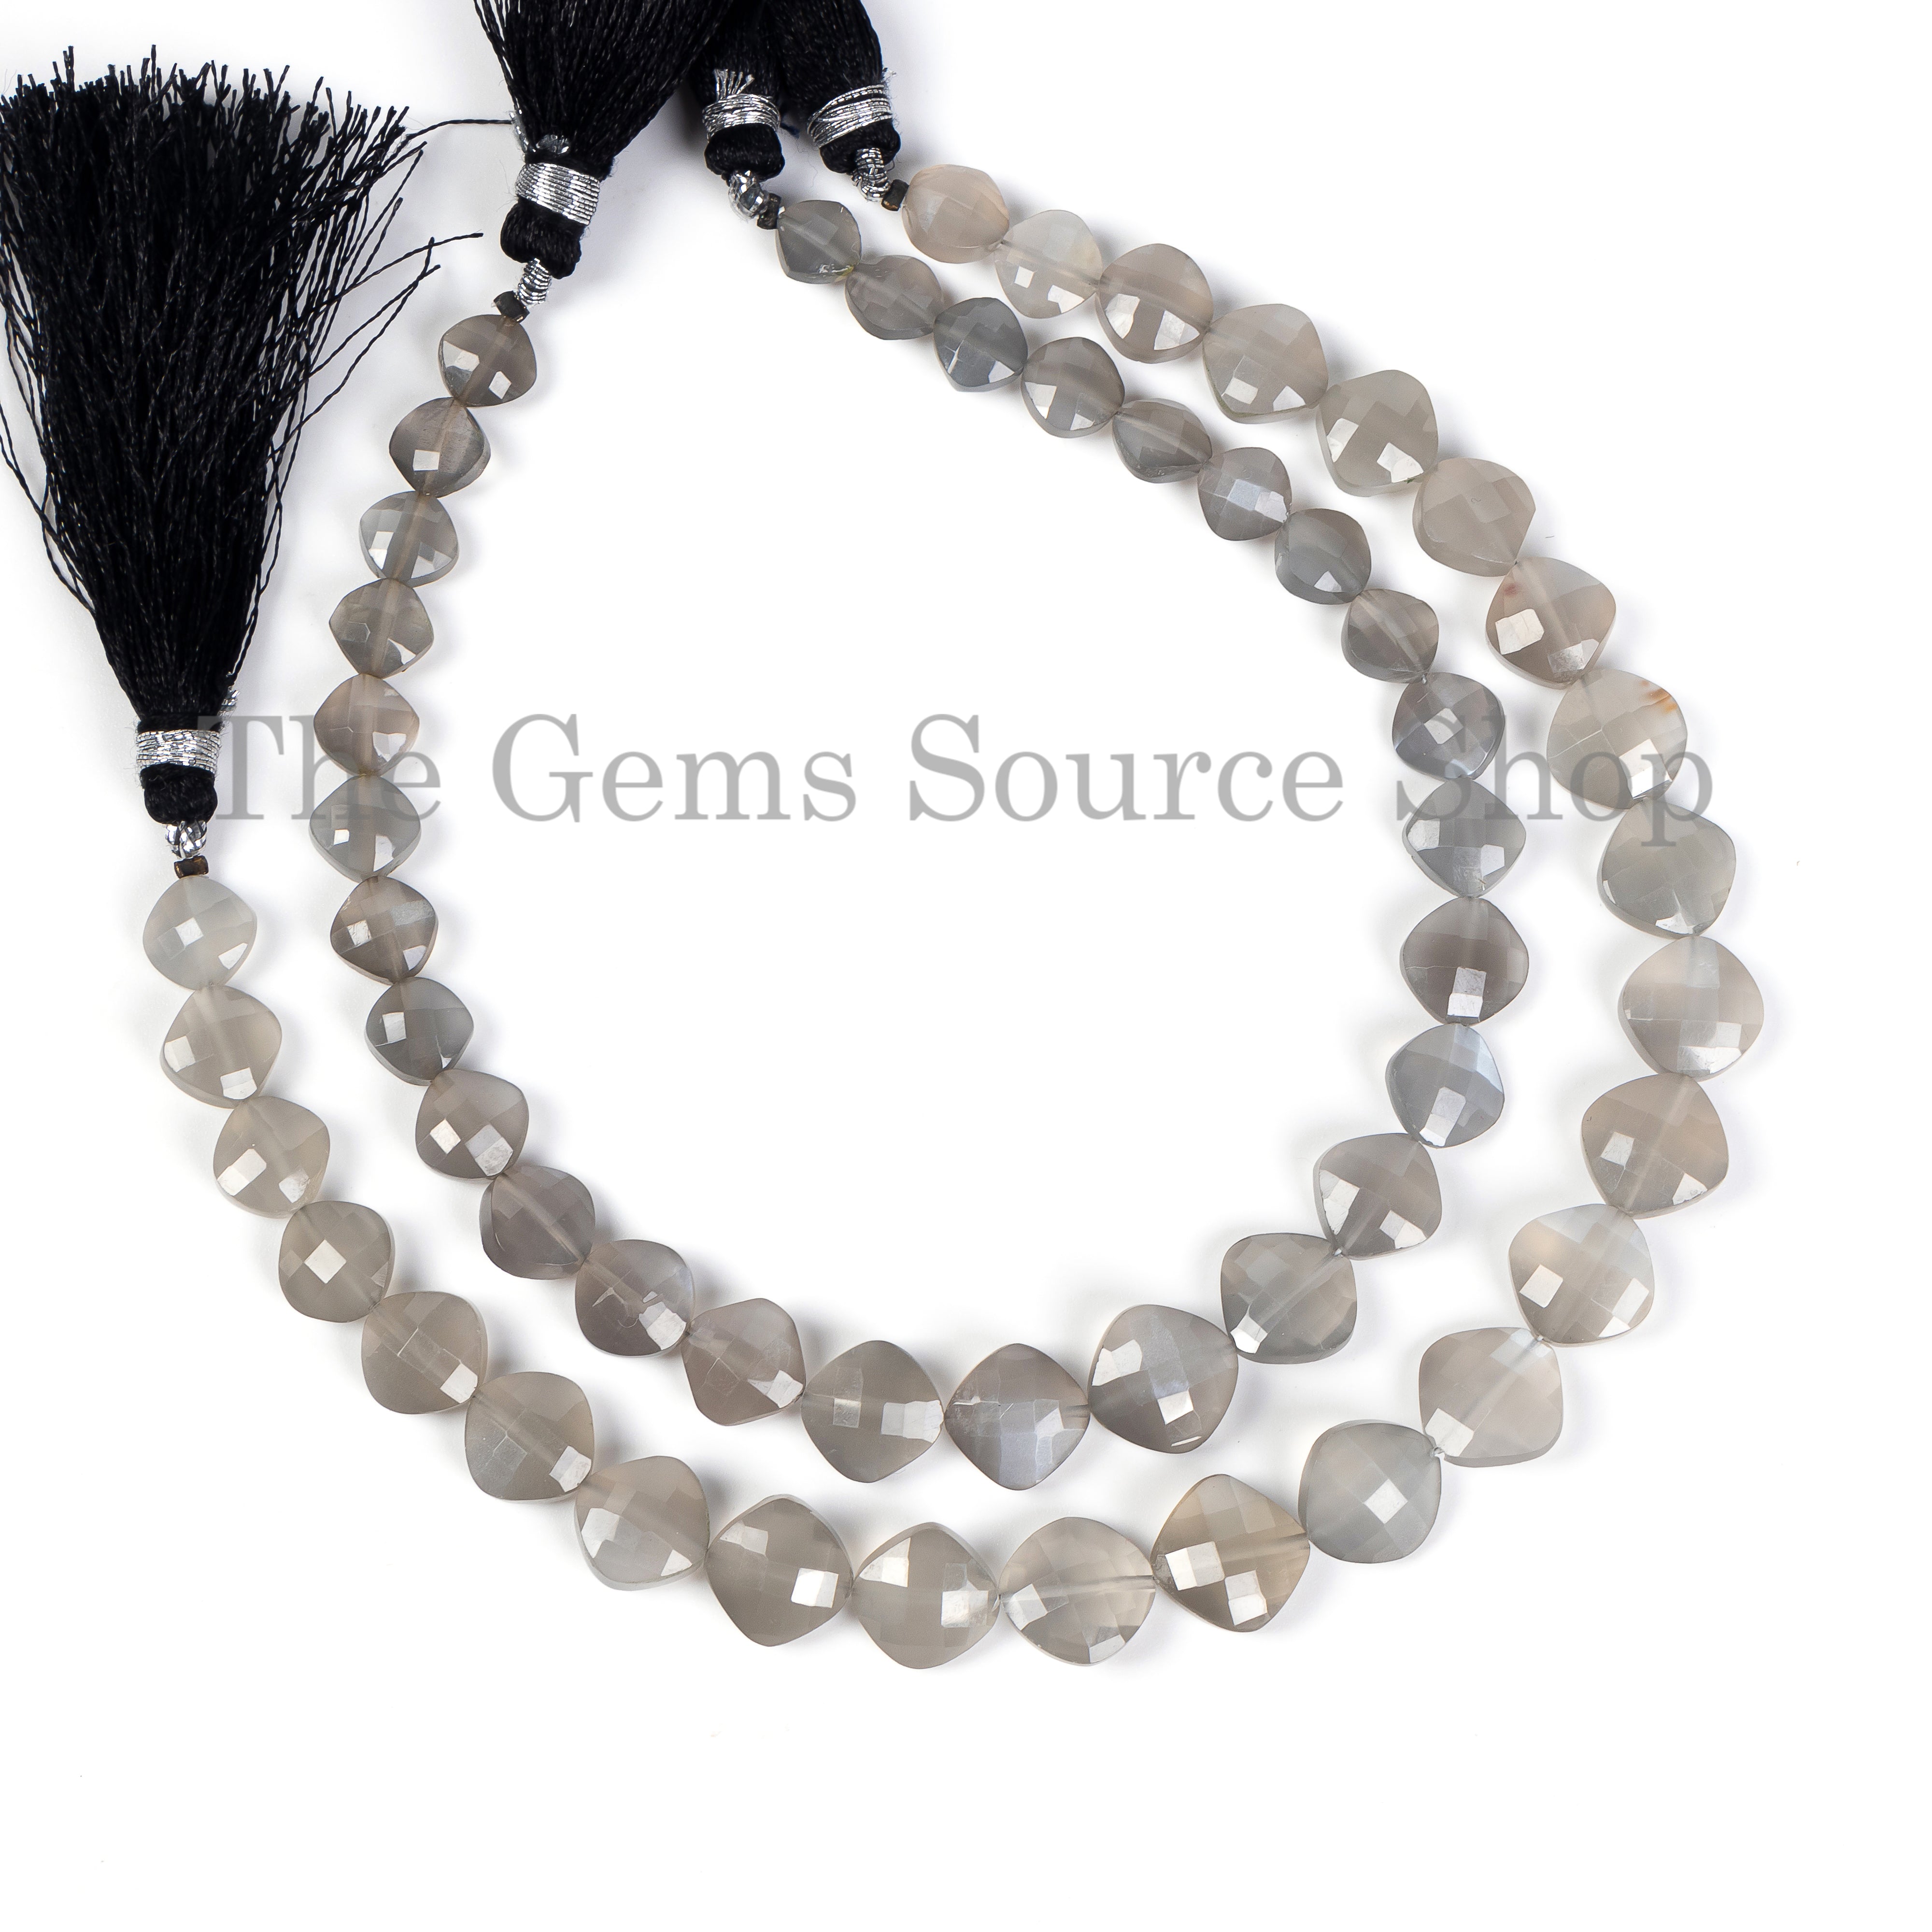 Natural Gray Moonstone Faceted Cushion Shape Gemstone Beads for Jewelry Making.